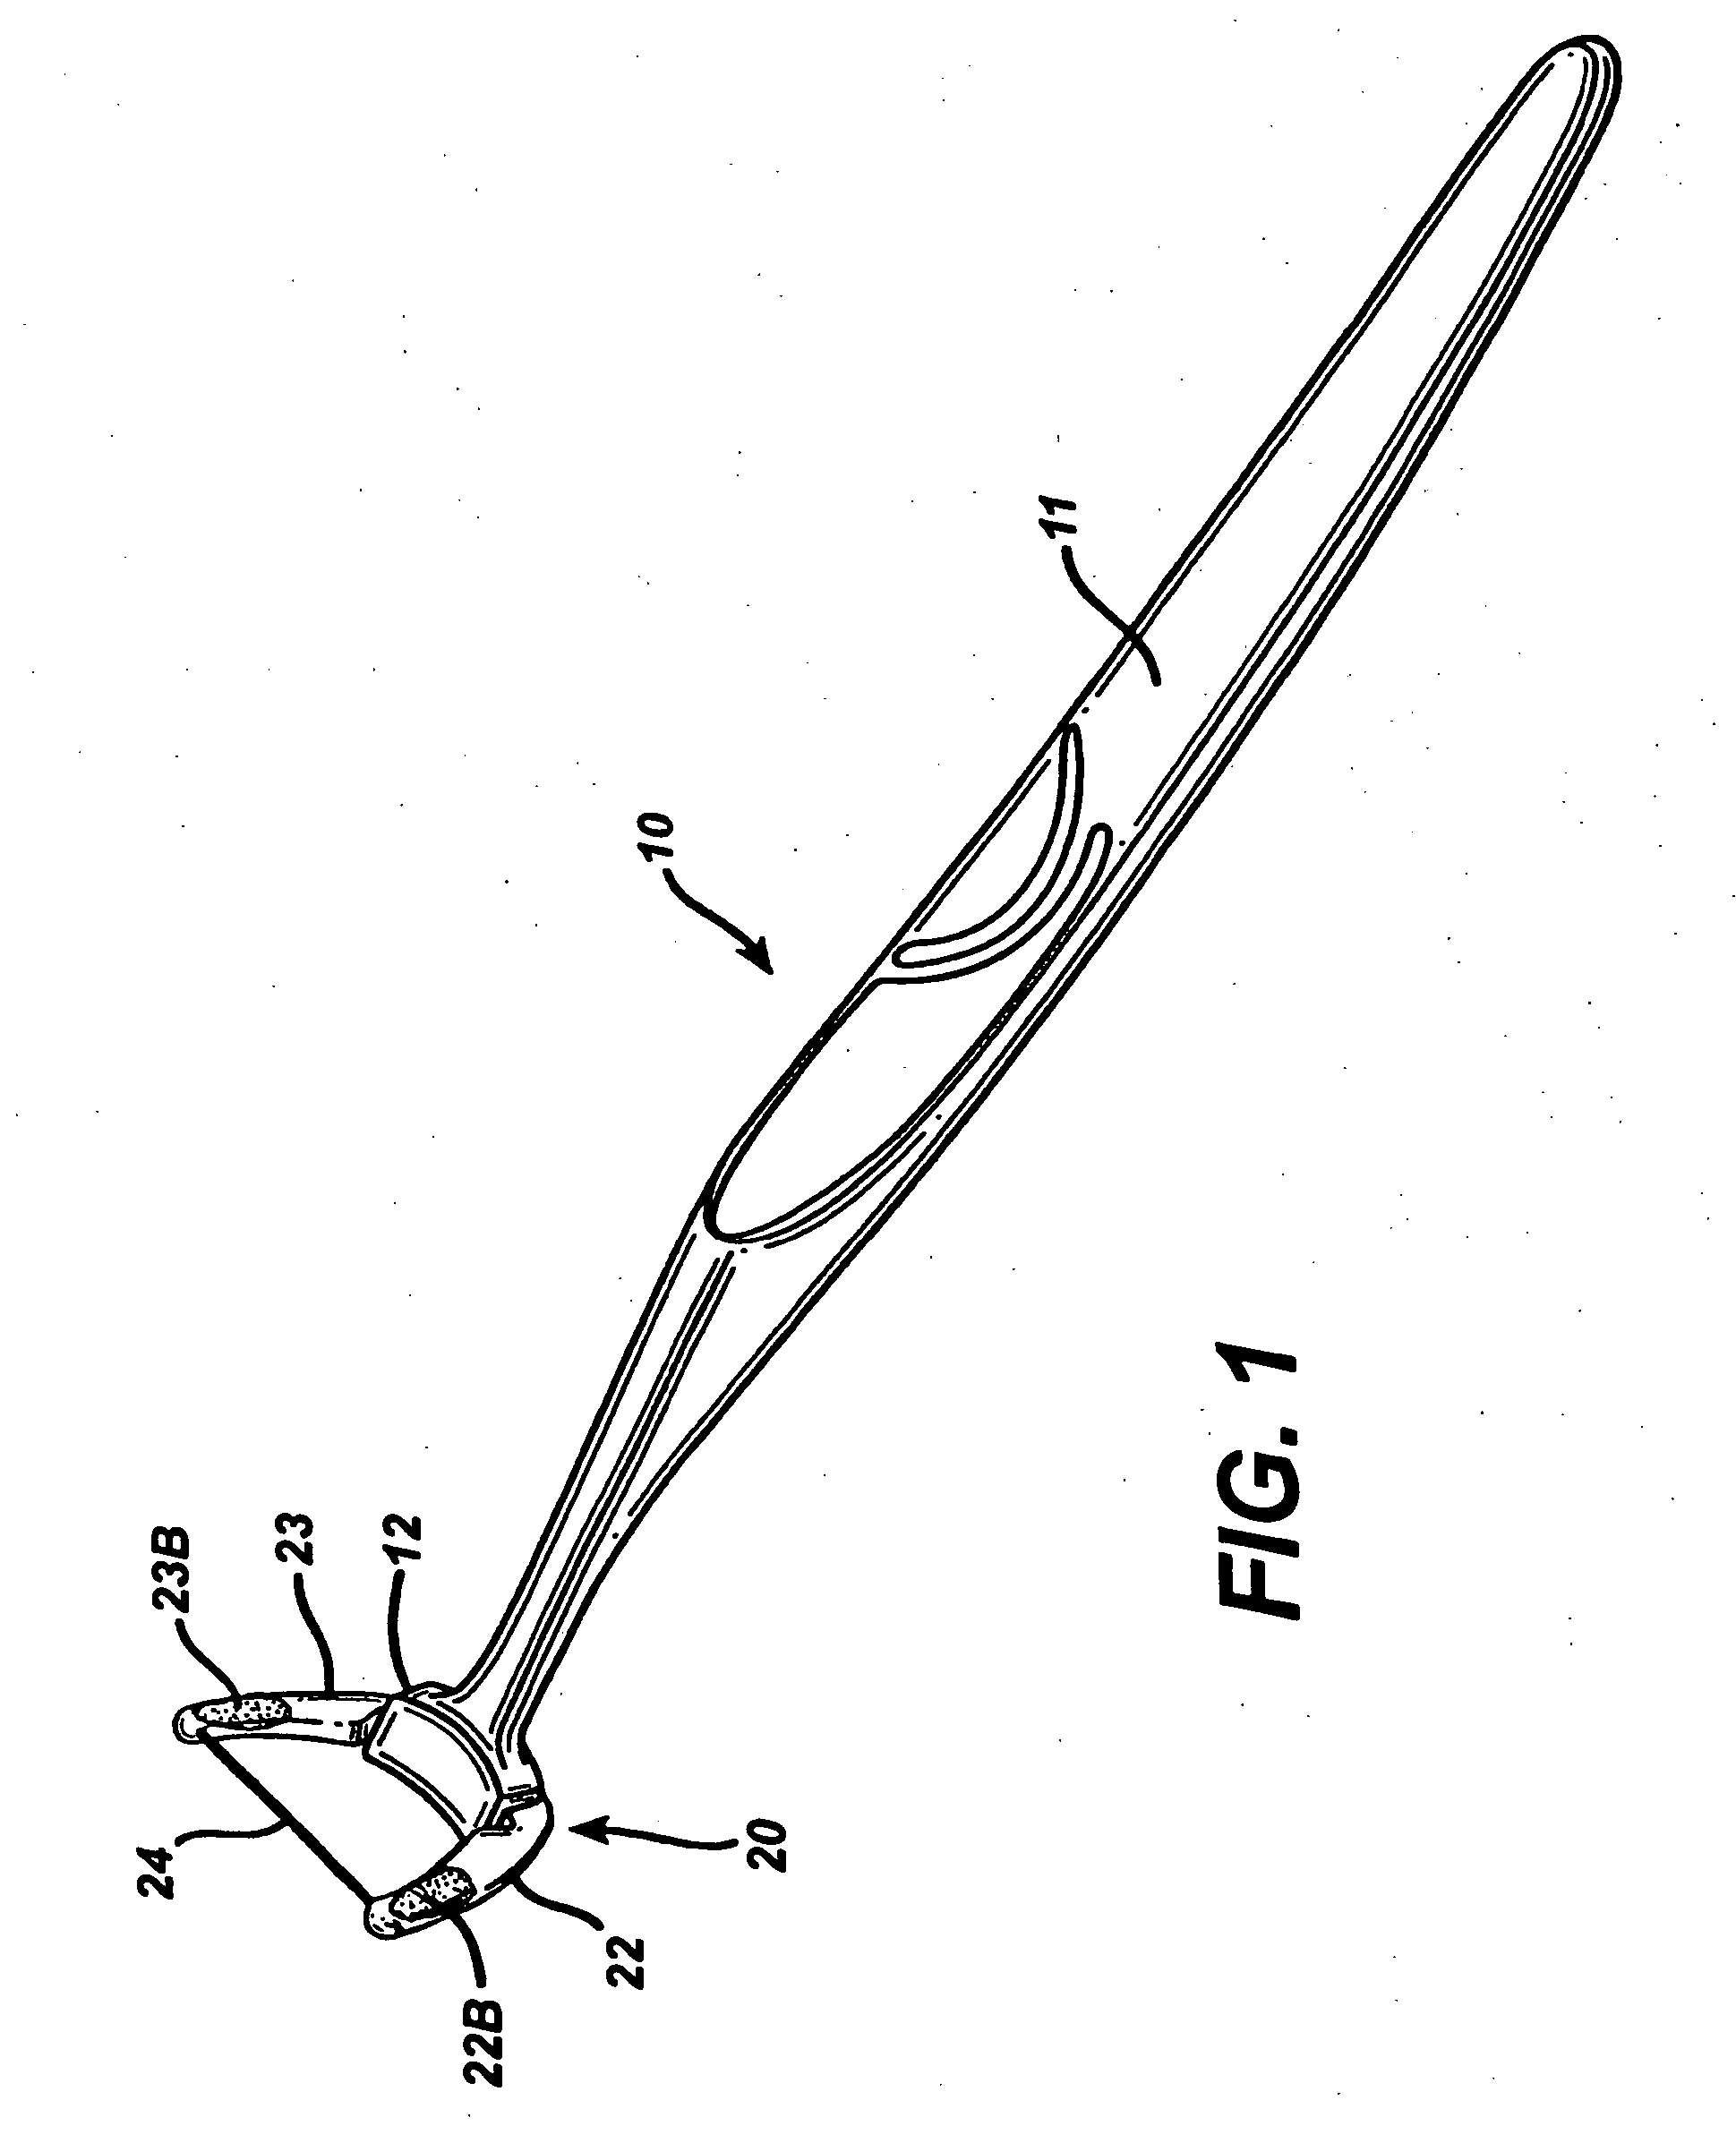 Dental device with improved retention of a flavor and/or chemotherapeutic agent composition